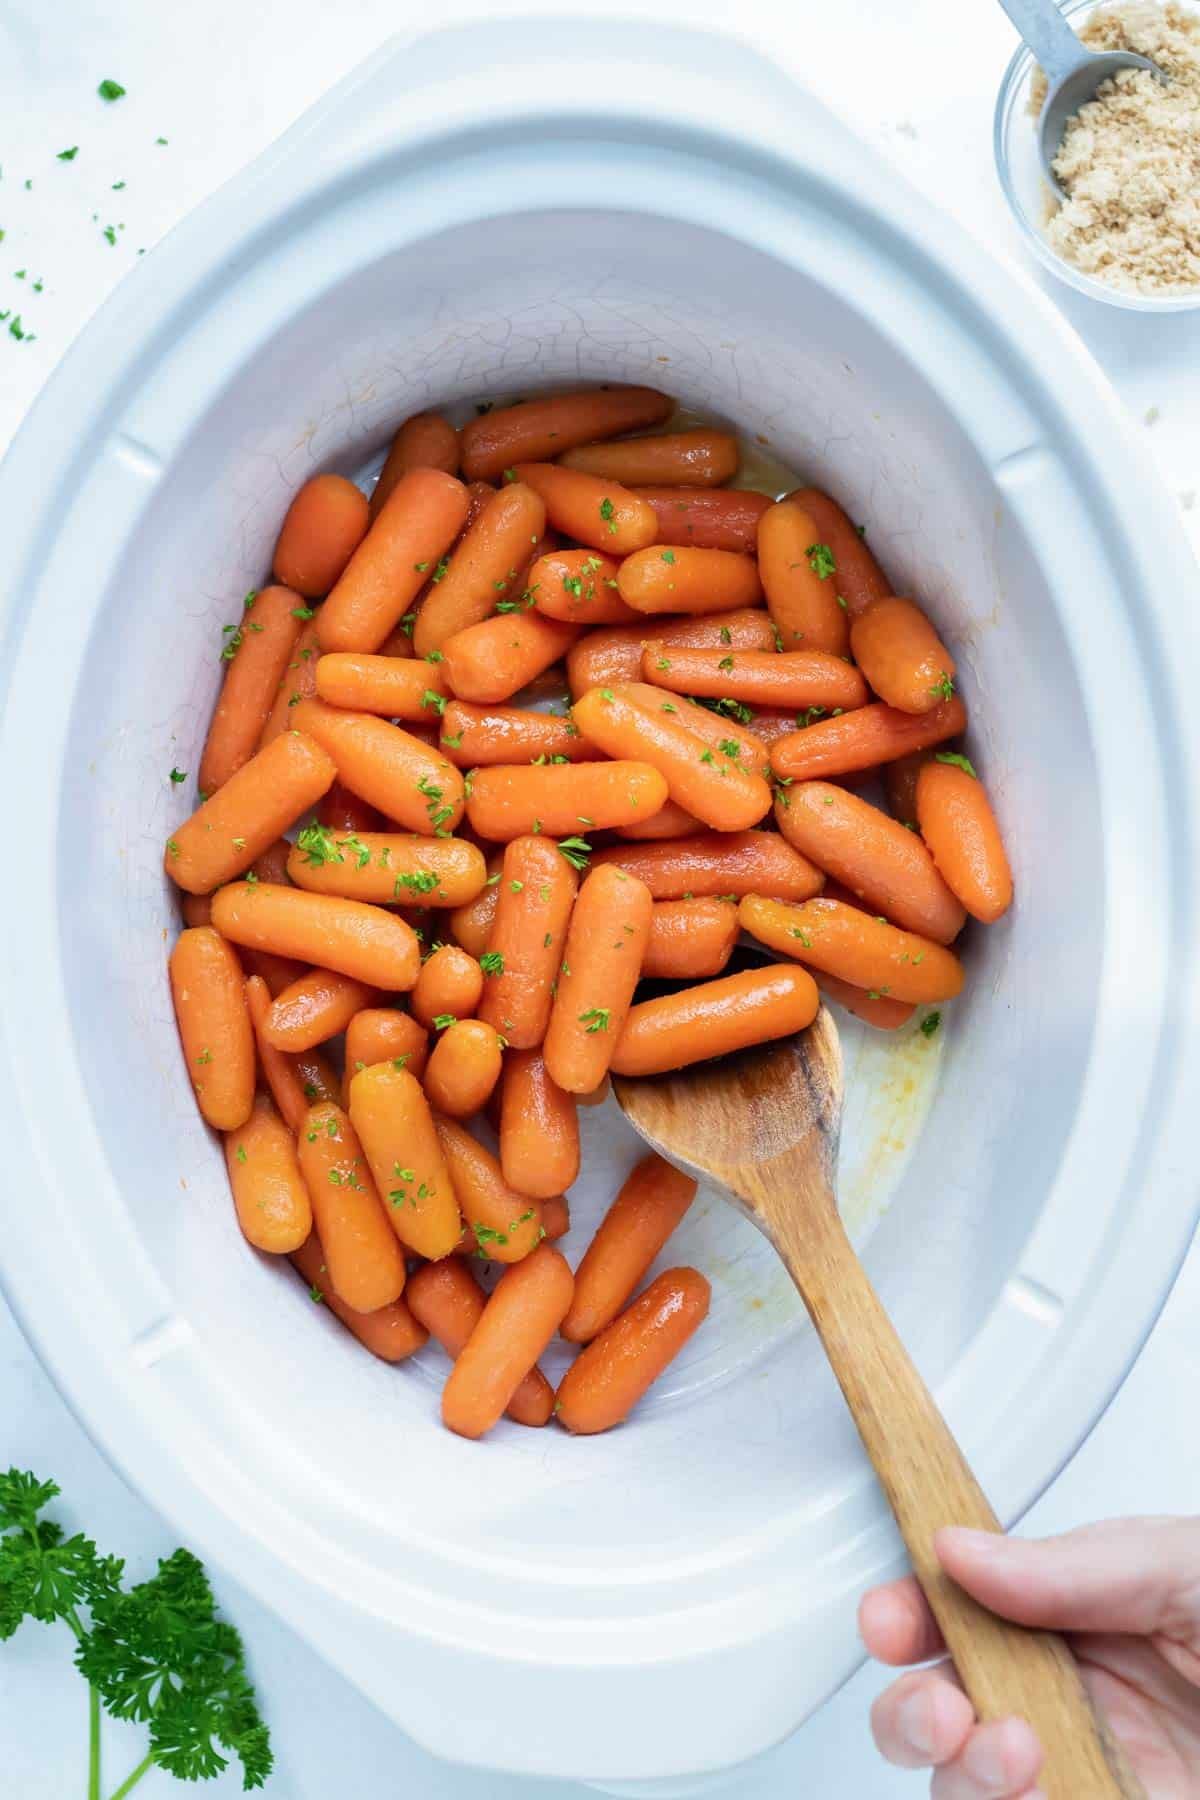 A 6-quart Crock-Pot with baby carrots that have been cooked in a honey, brown sugar, and butter sauce until perfectly glazed.